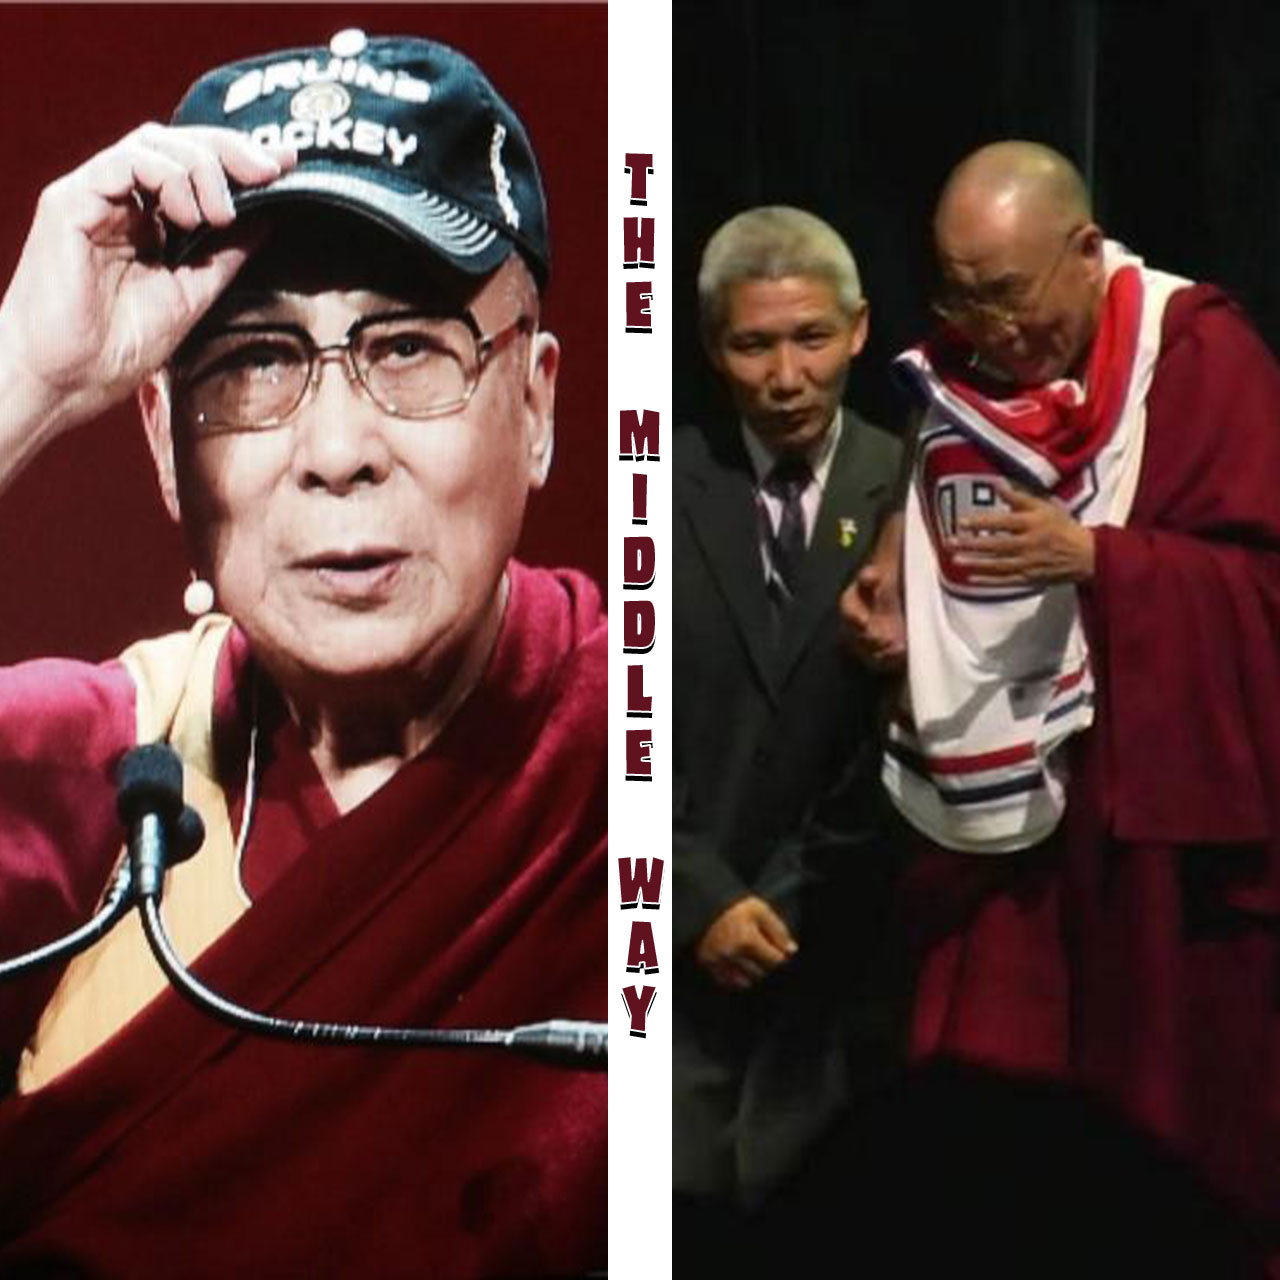 Dalai Lama opts for the Middle Way with Bruins and Habs